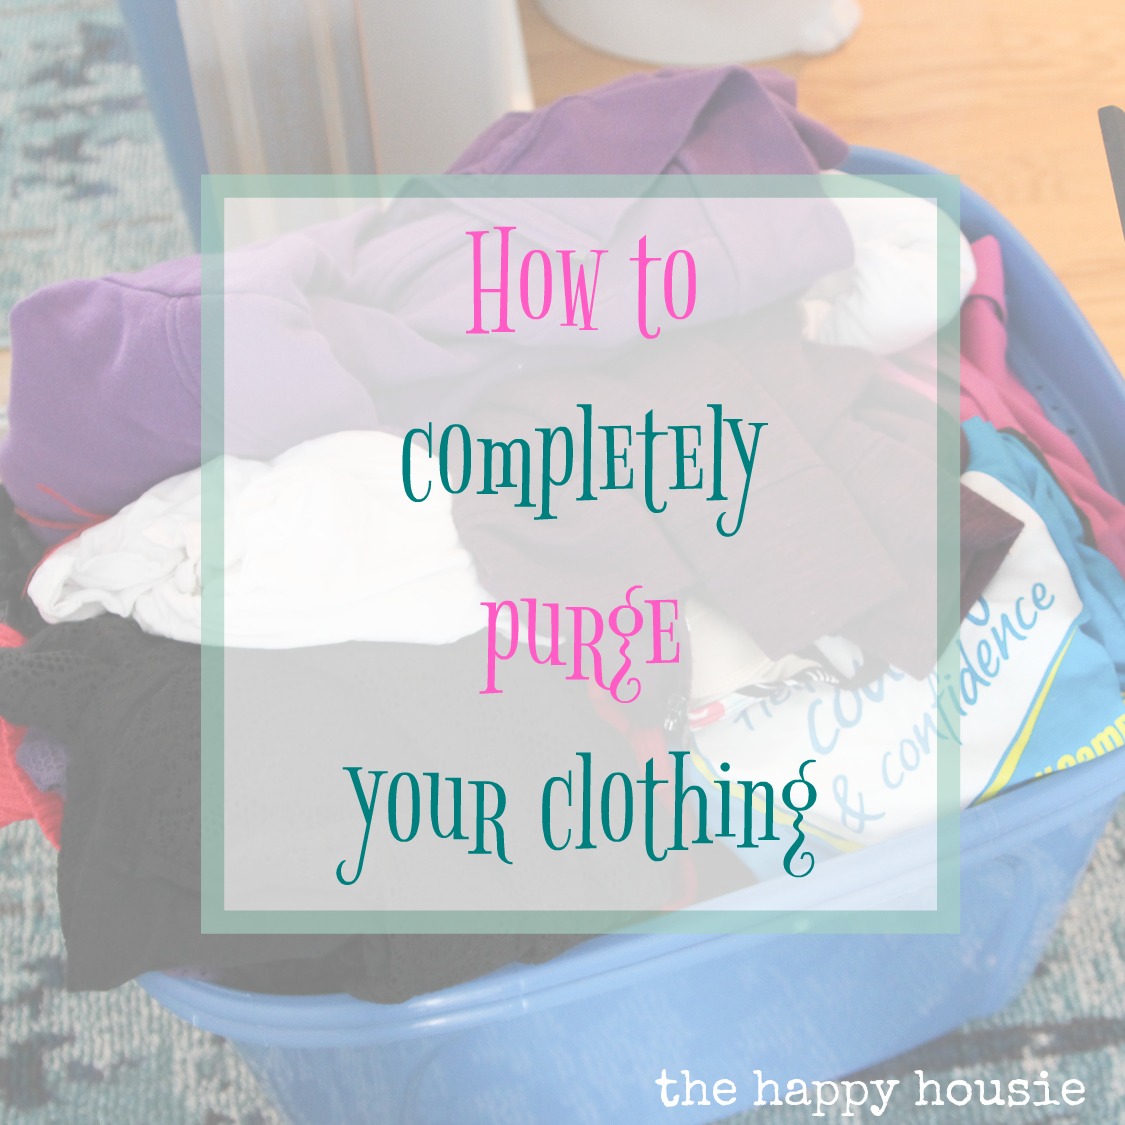 How to Completely Purge Your Clothing